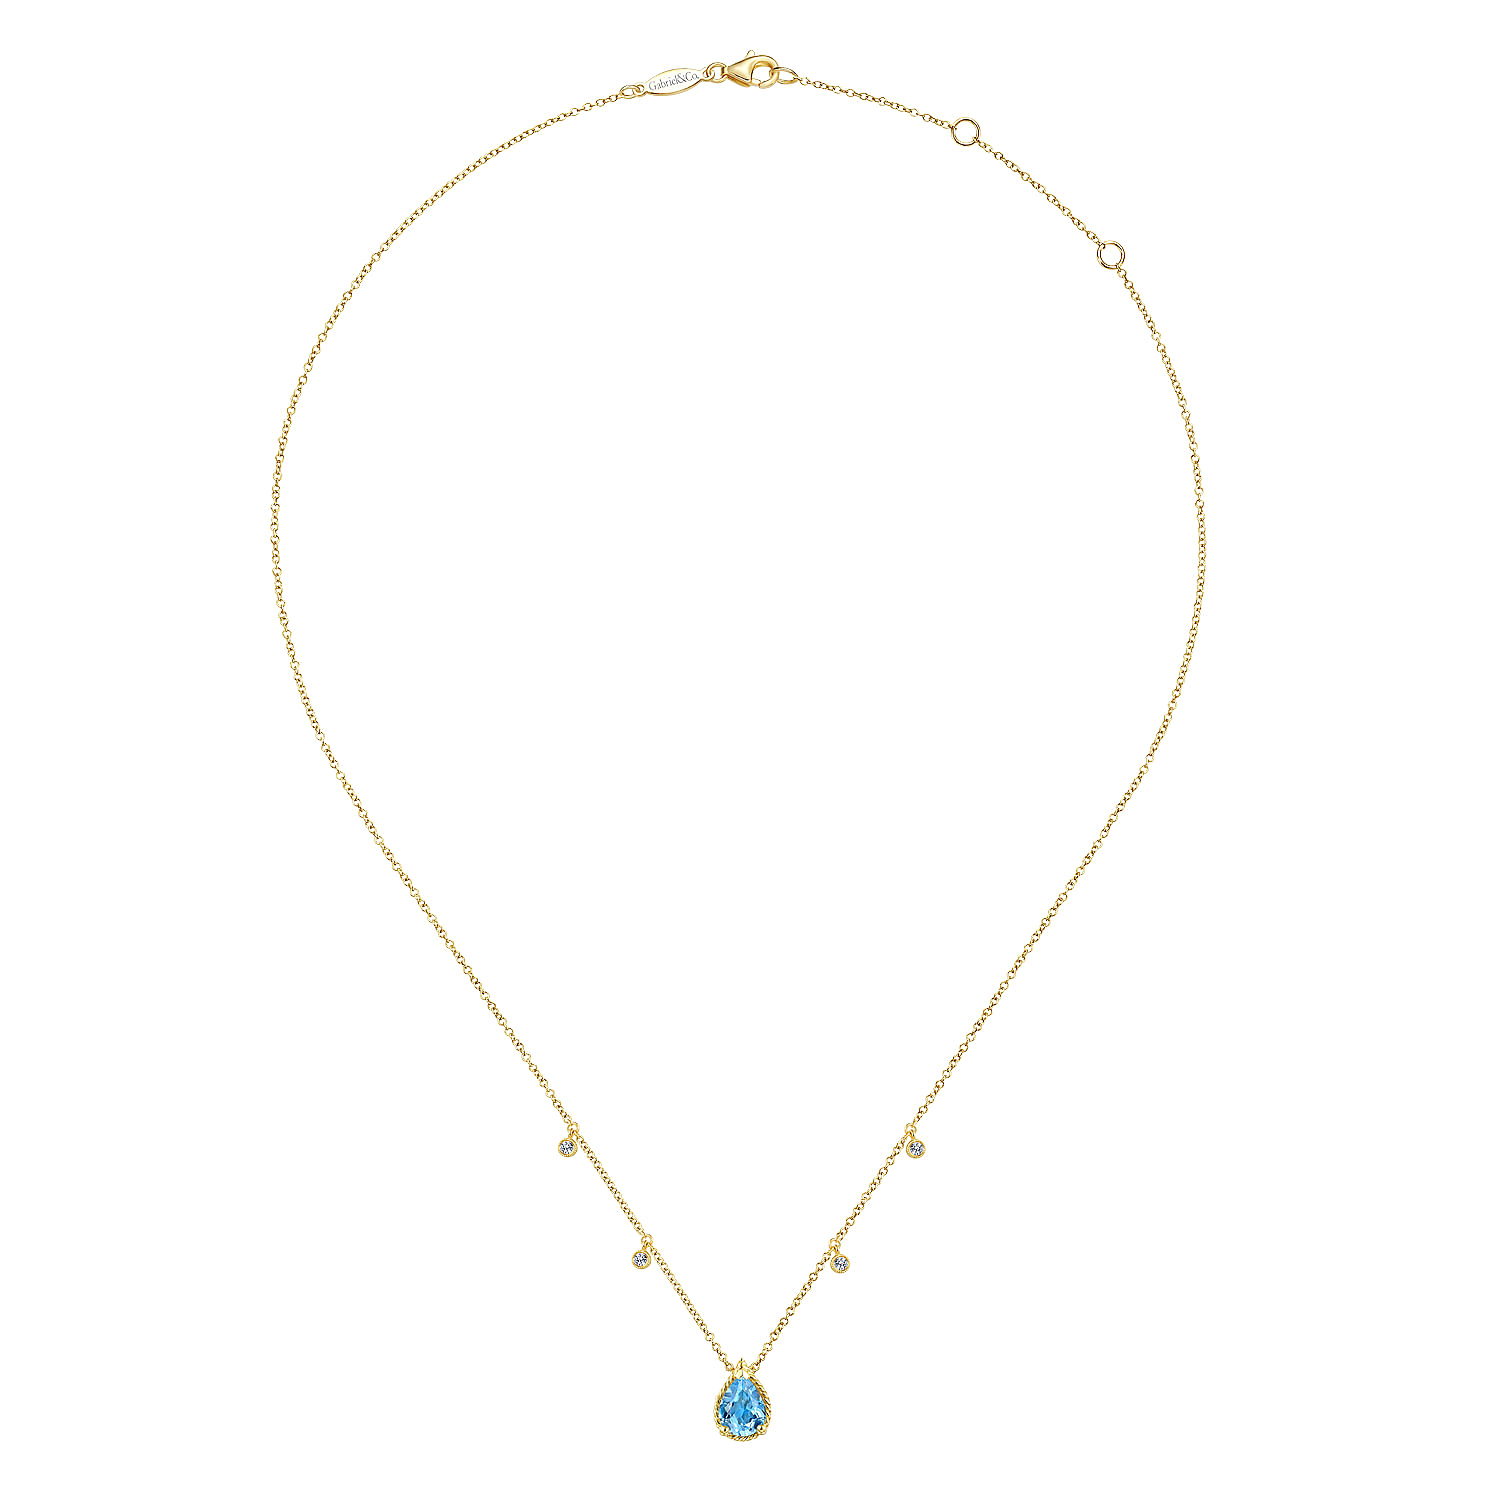 14K Yellow Gold Pear Shape Blue Topaz Pendant Necklace with Diamond Side Drops